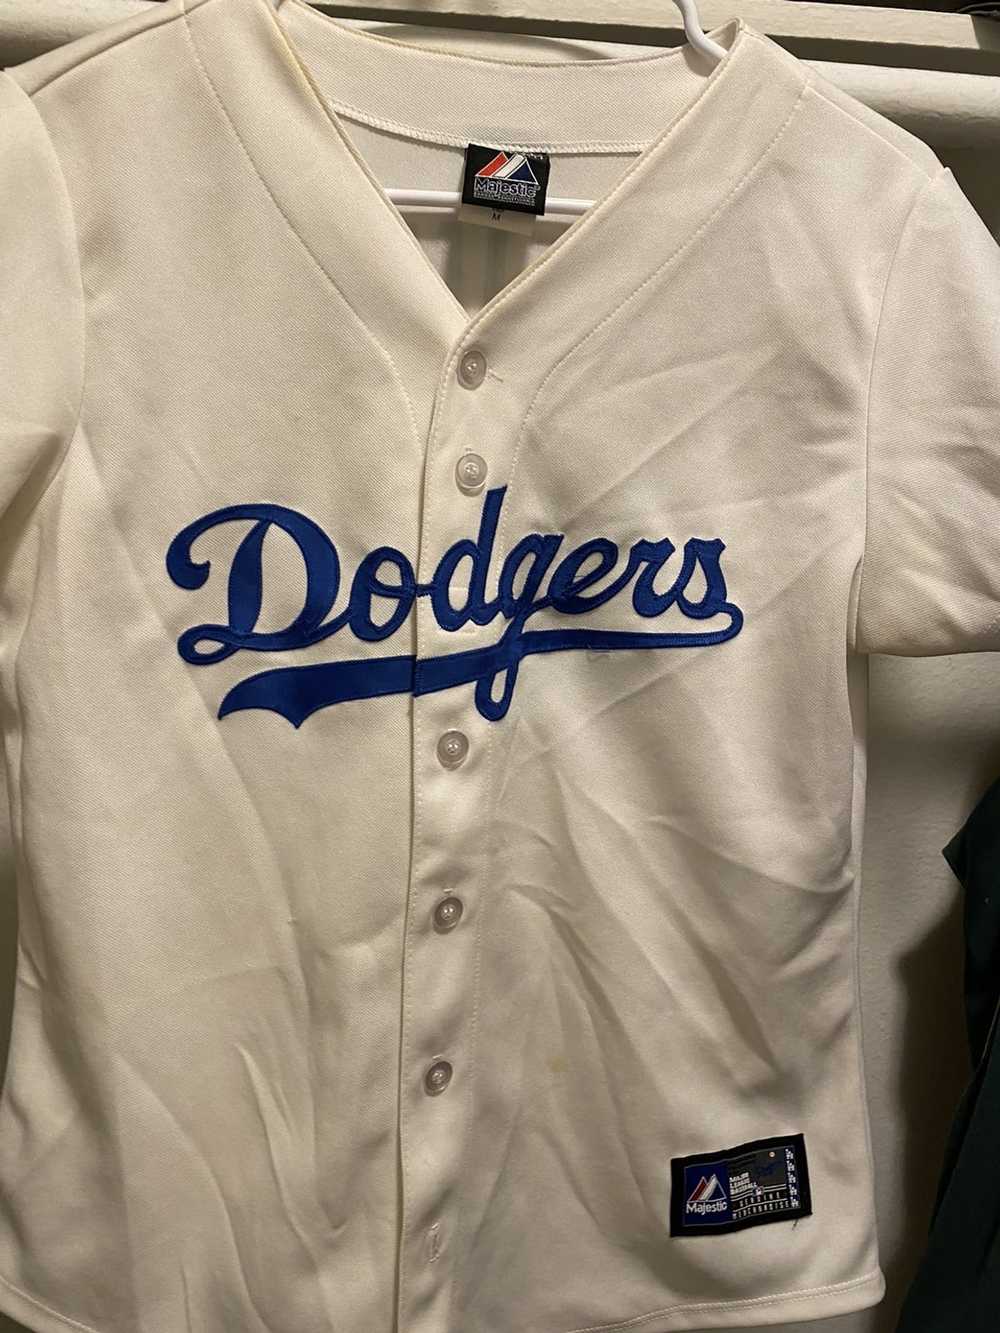 Gently Worn • Men's Authentic MLB Majestic Dodger Baseball Jacket 2XL -  clothing & accessories - by owner - apparel